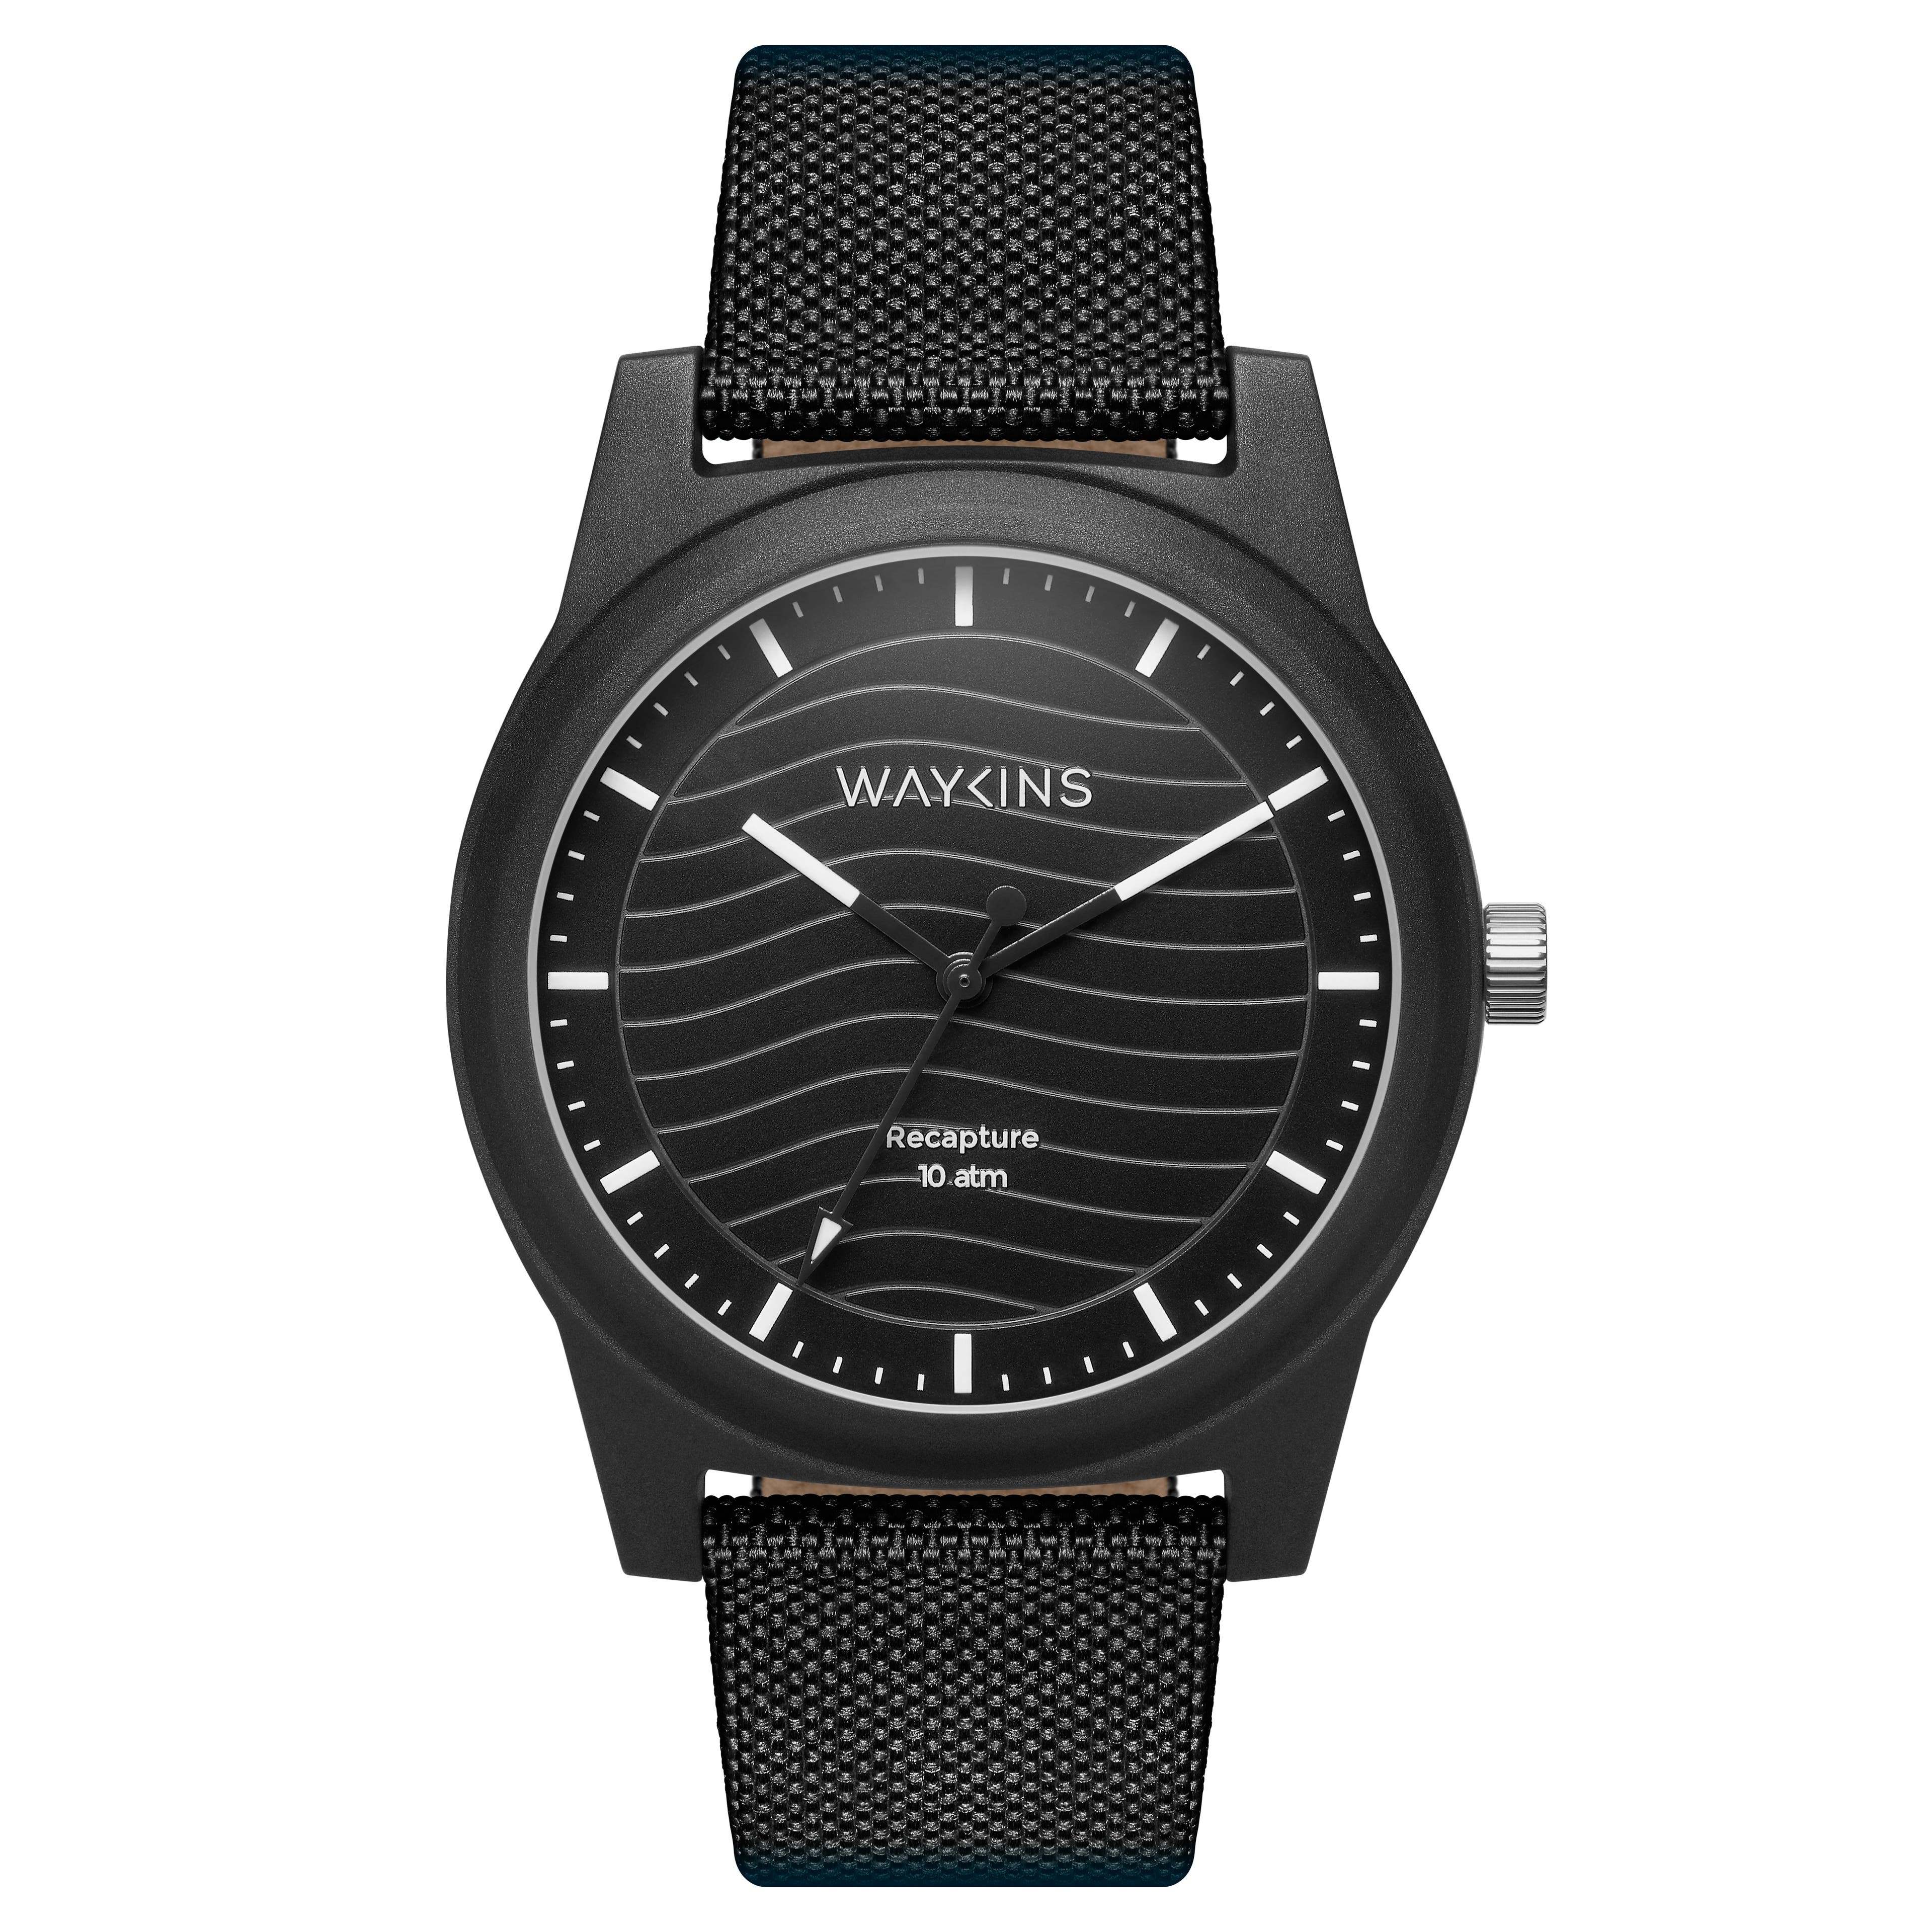 Recapture | Black Recycled Material Watch